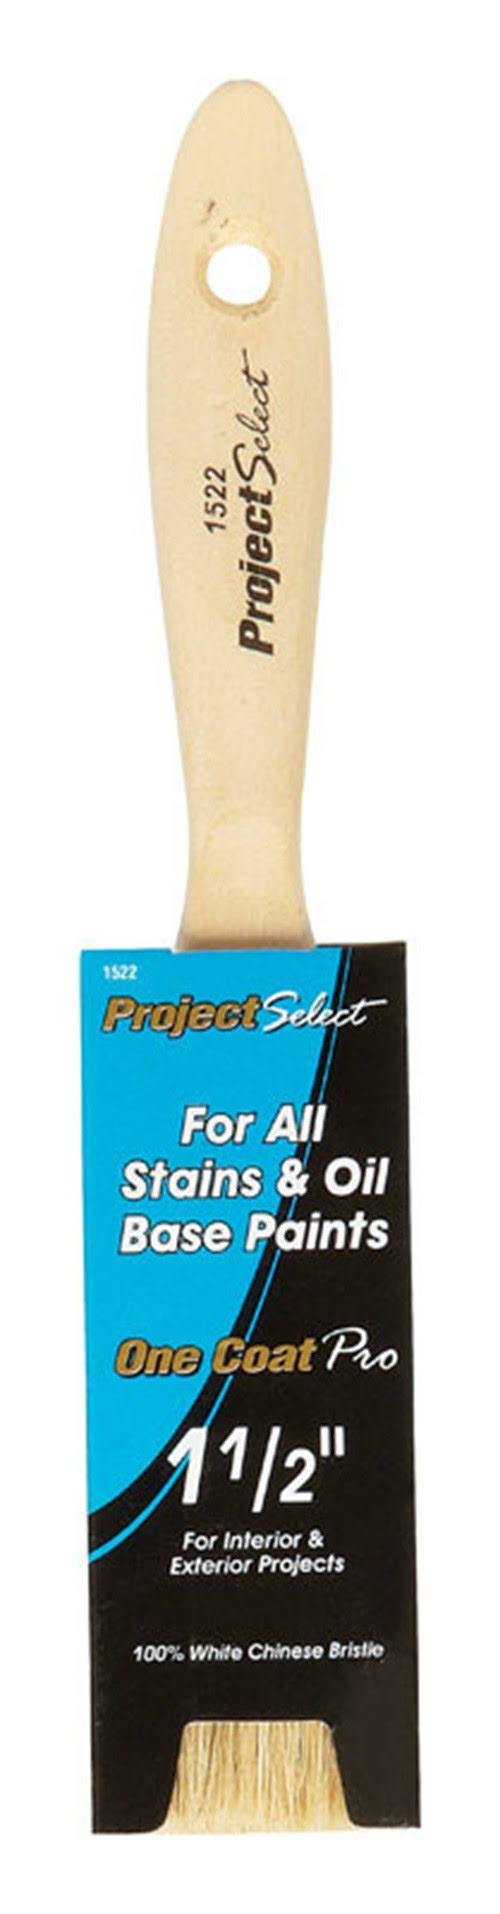 Linzer Project Select Flat Finest Natural Brush - White Bristle, 1 1/2"